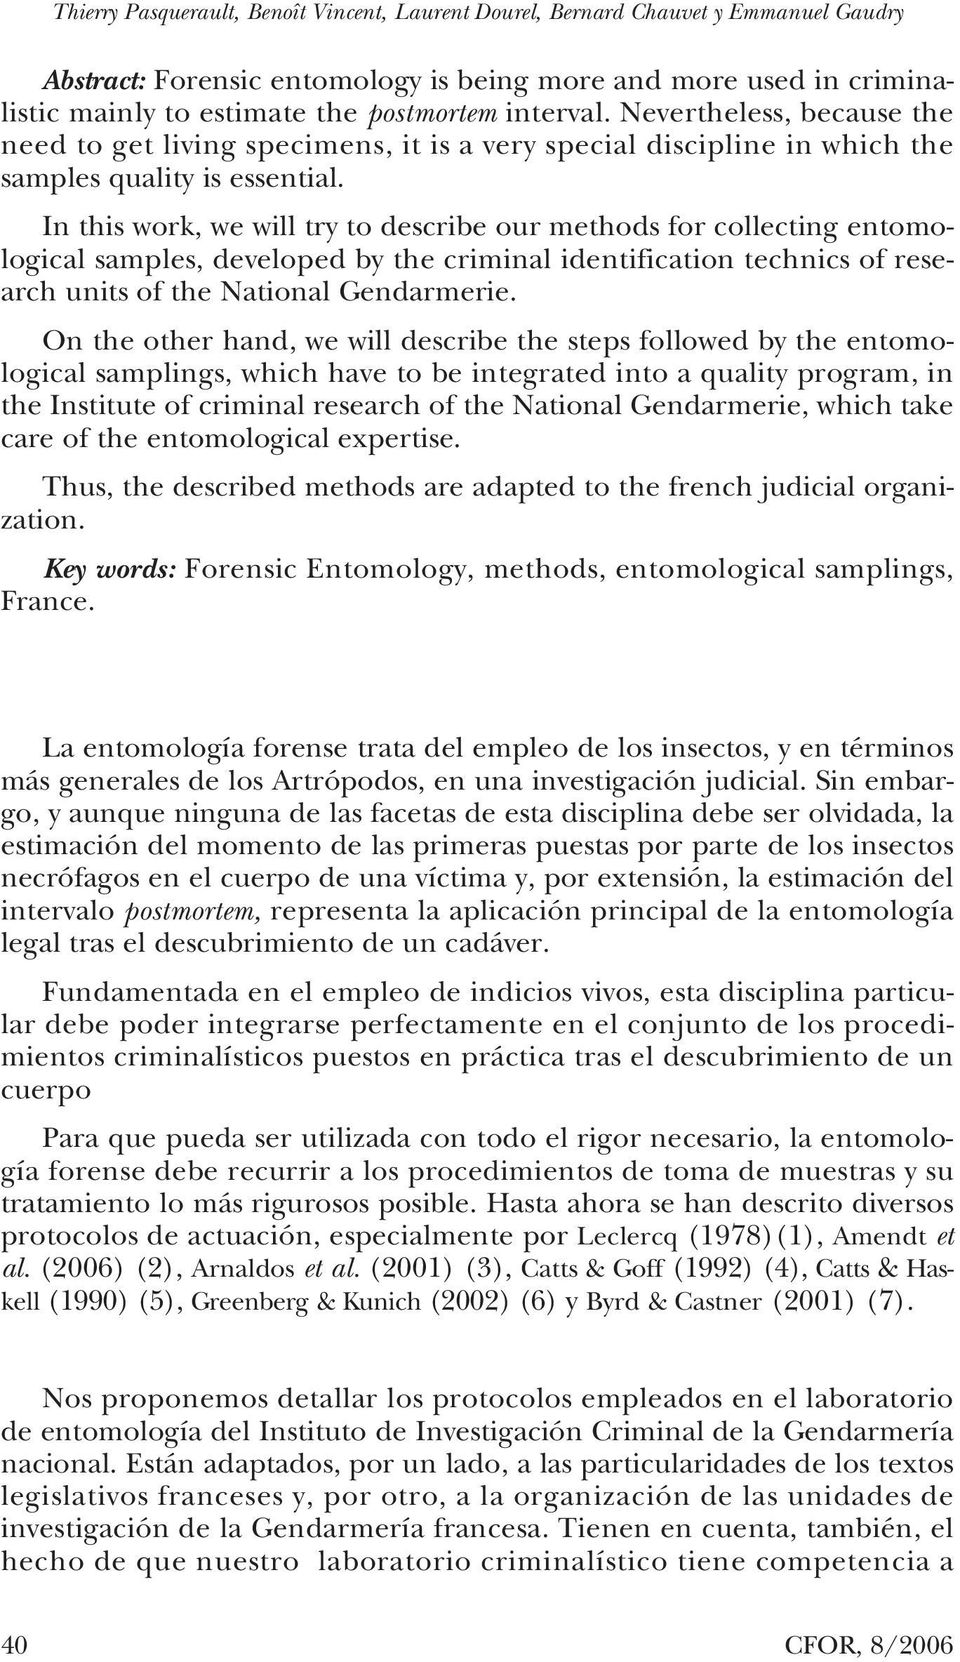 In this work, we will try to describe our methods for collecting entomological samples, developed by the criminal identification technics of research units of the National Gendarmerie.